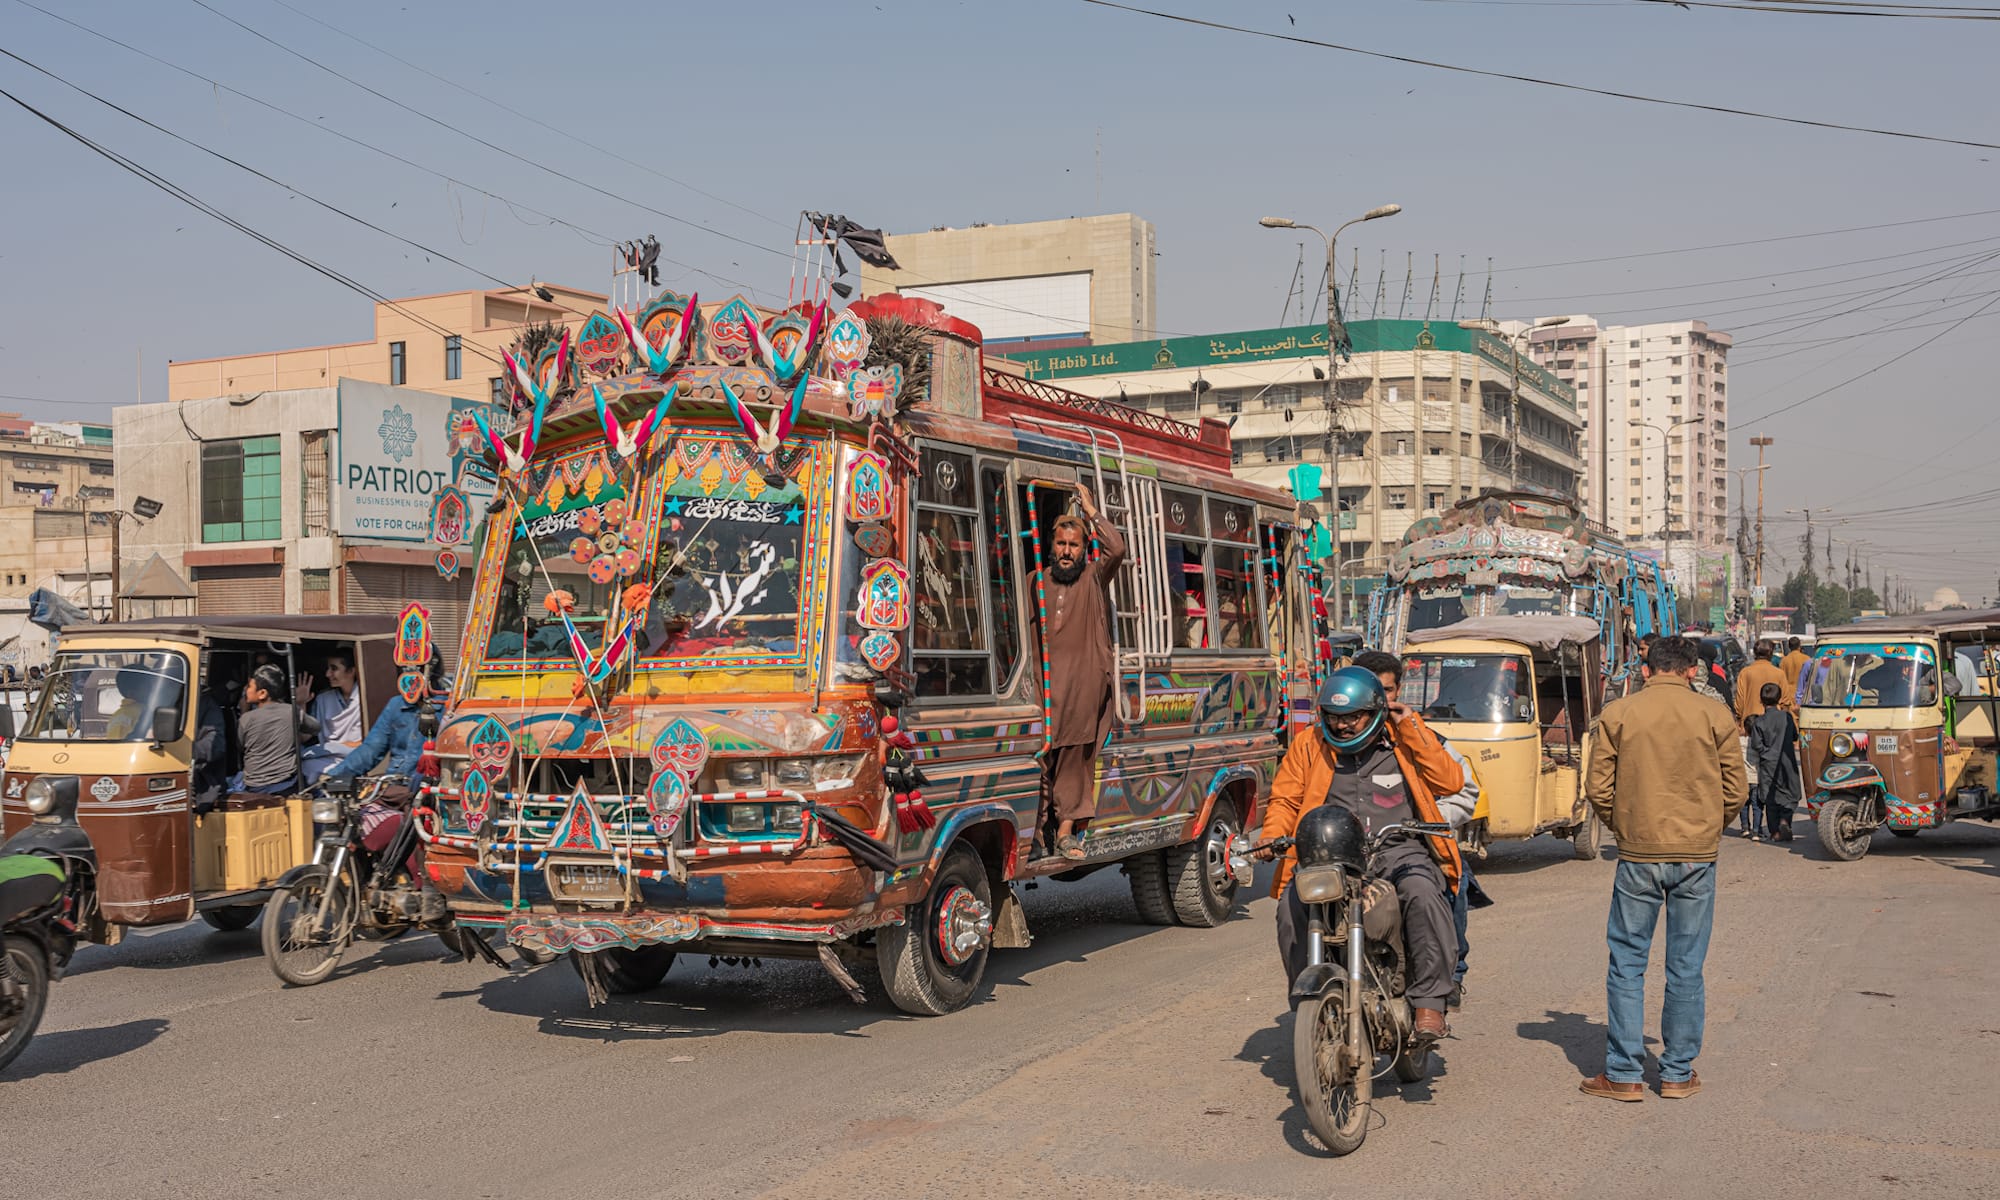 Busy street scene with a decorated bus amongst other traffic including motorbikes and tuktuks.